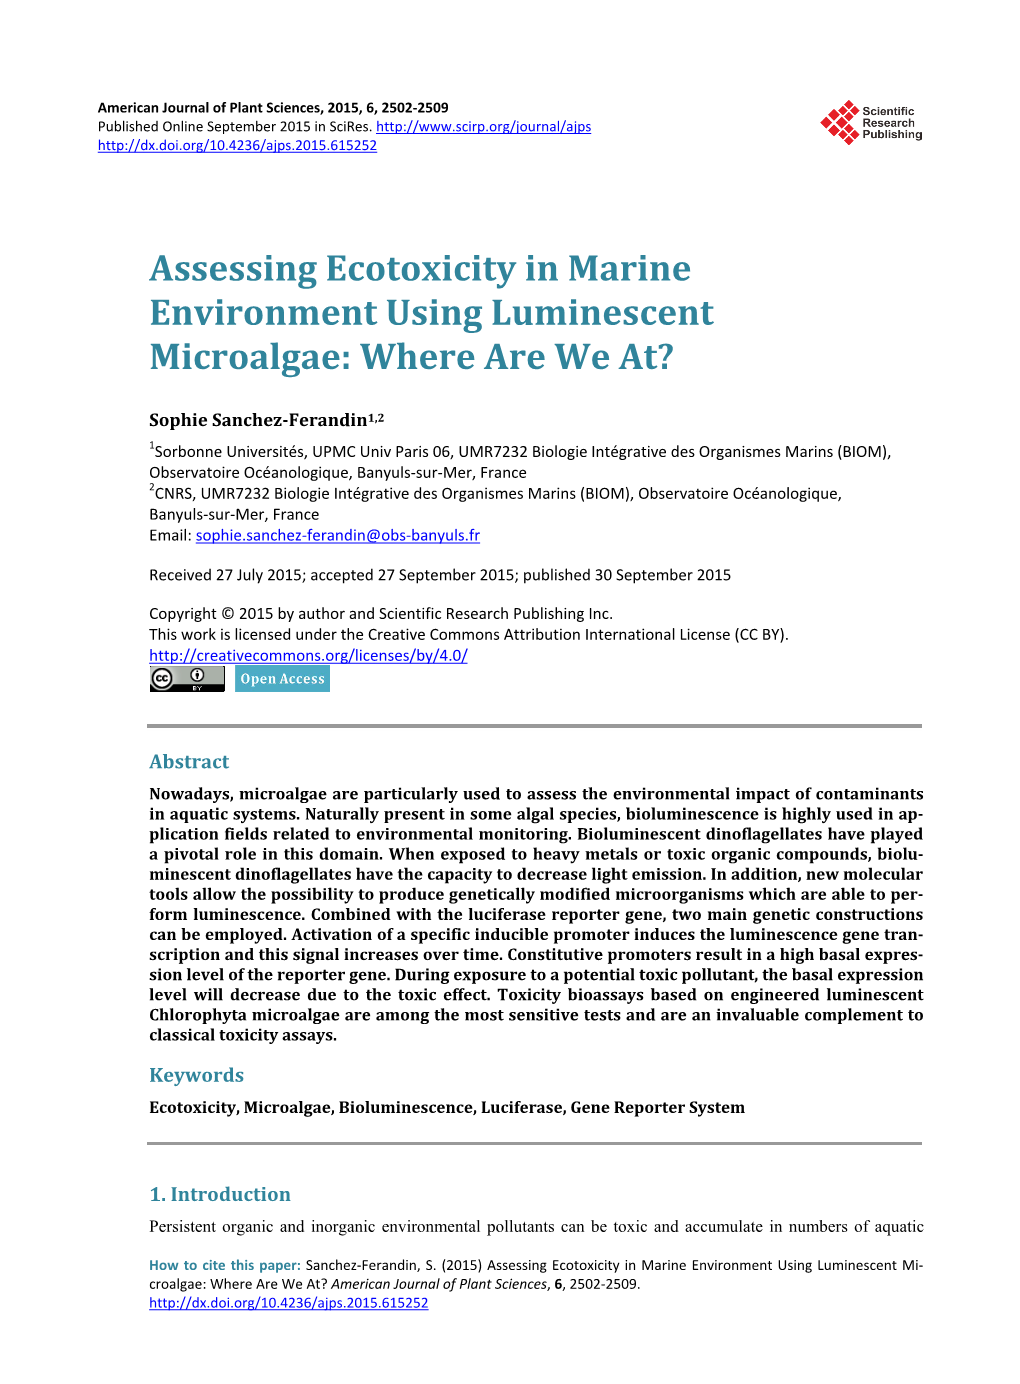 Assessing Ecotoxicity in Marine Environment Using Luminescent Microalgae: Where Are We At?